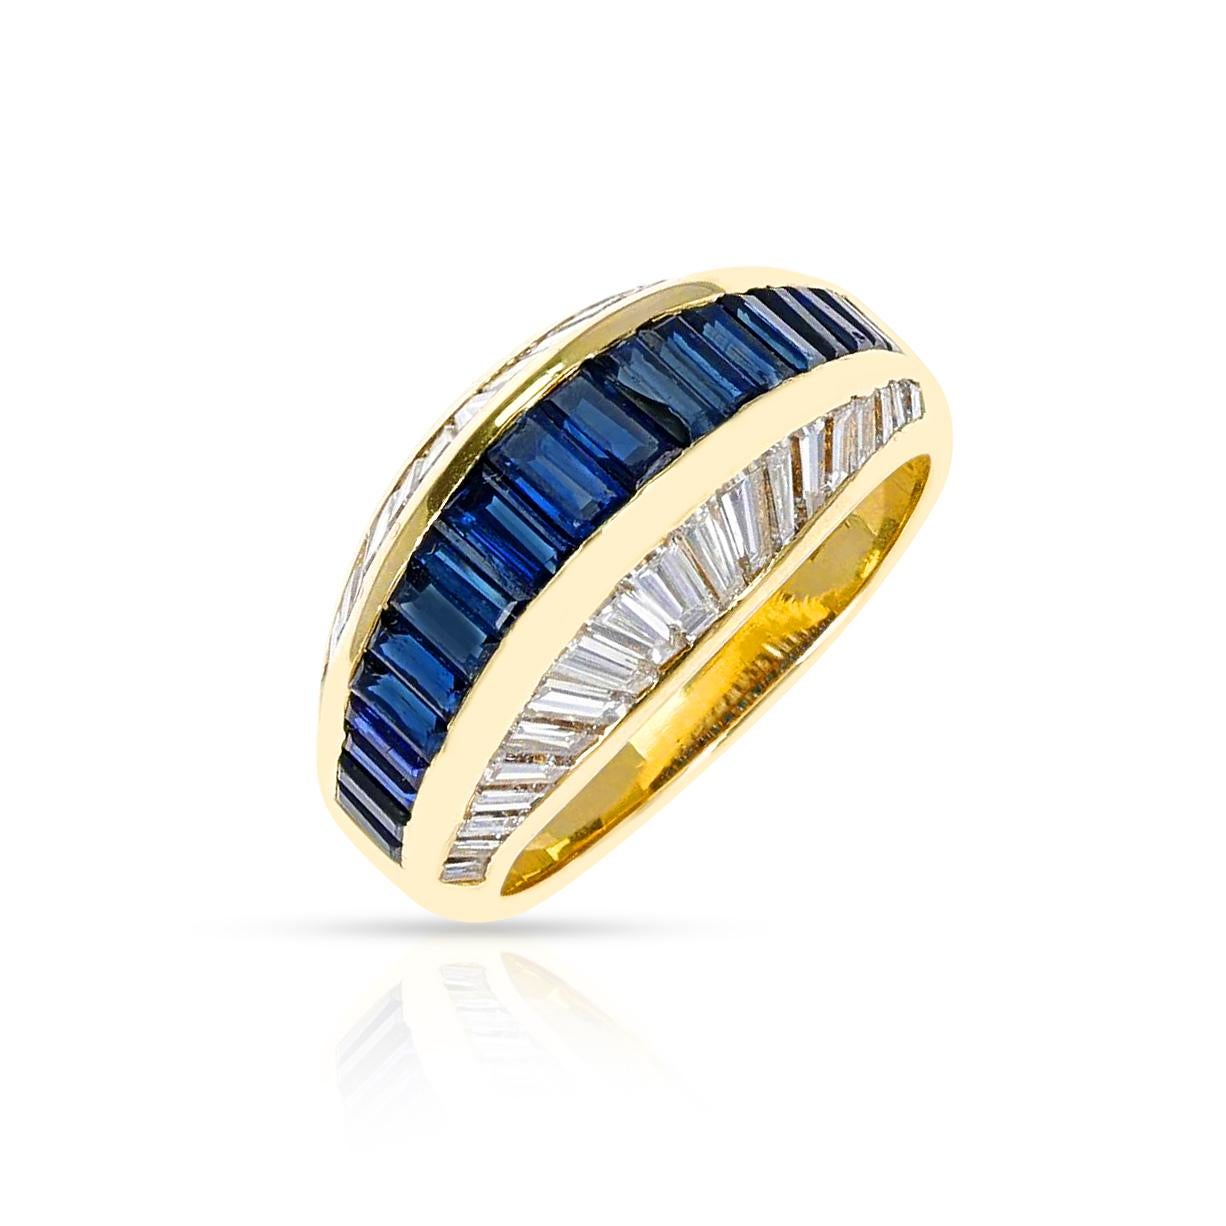 A stunning Cartier Sapphire and Diamond Baguette Ring made in 18 Karat Yellow Gold. The ring size is US 6. The total weight of the ring is 7.45 grams.